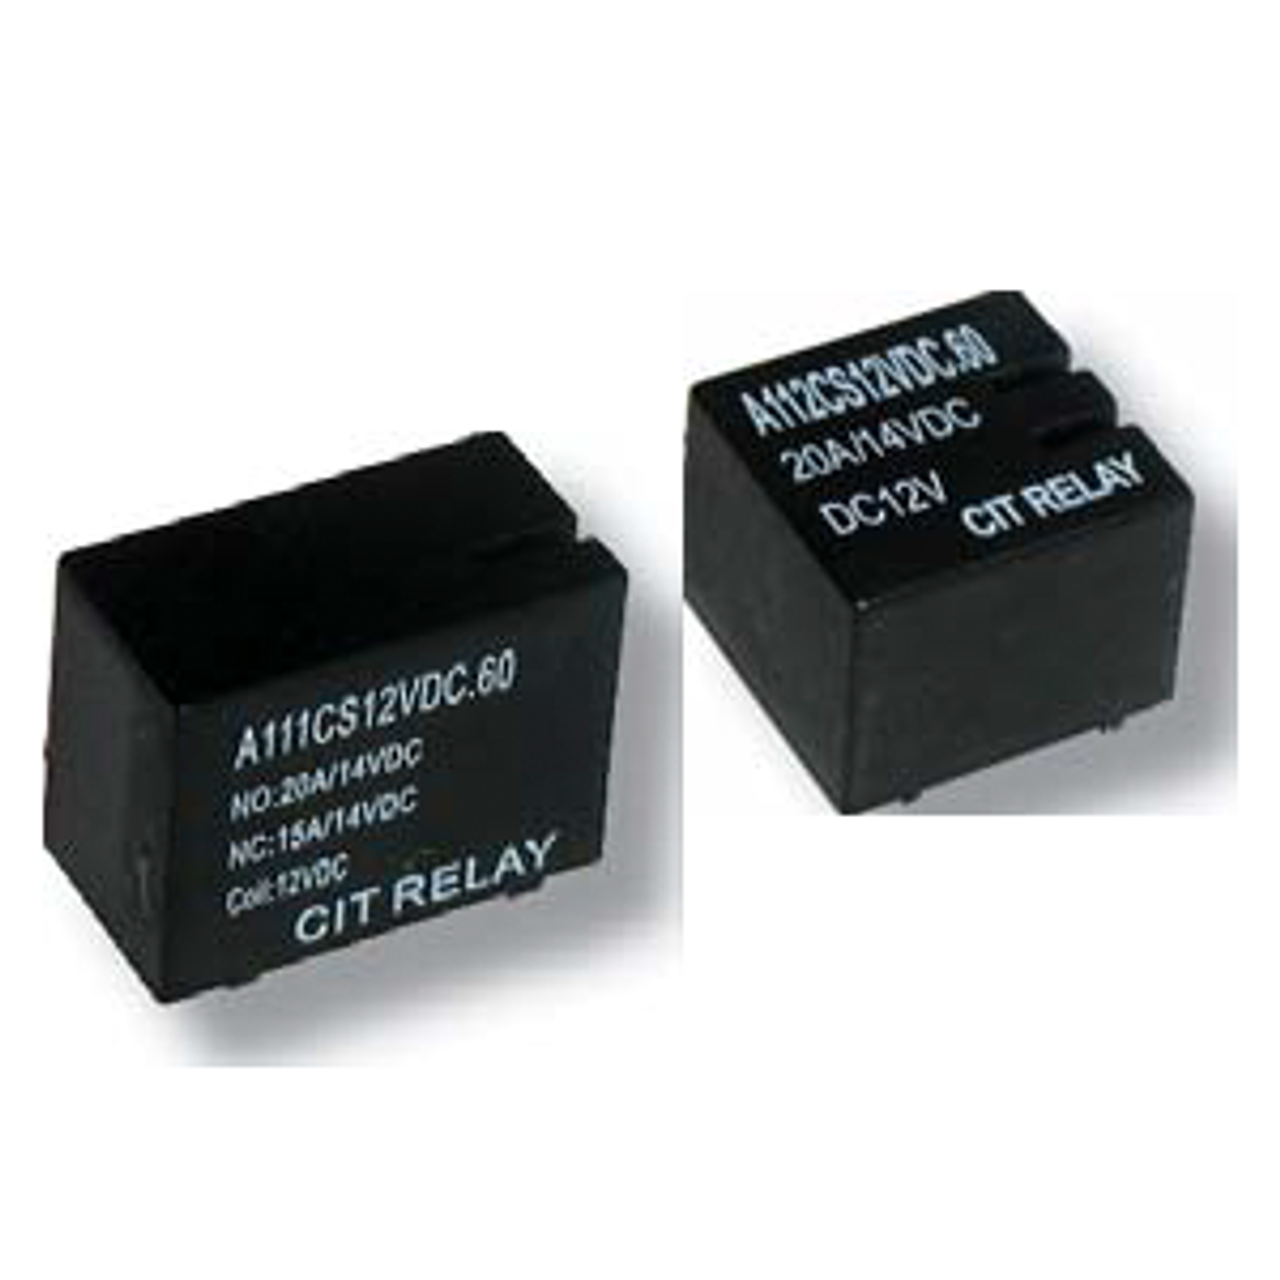 CIT Relay and Switch A112AC12VDC.60 Automotive Relays